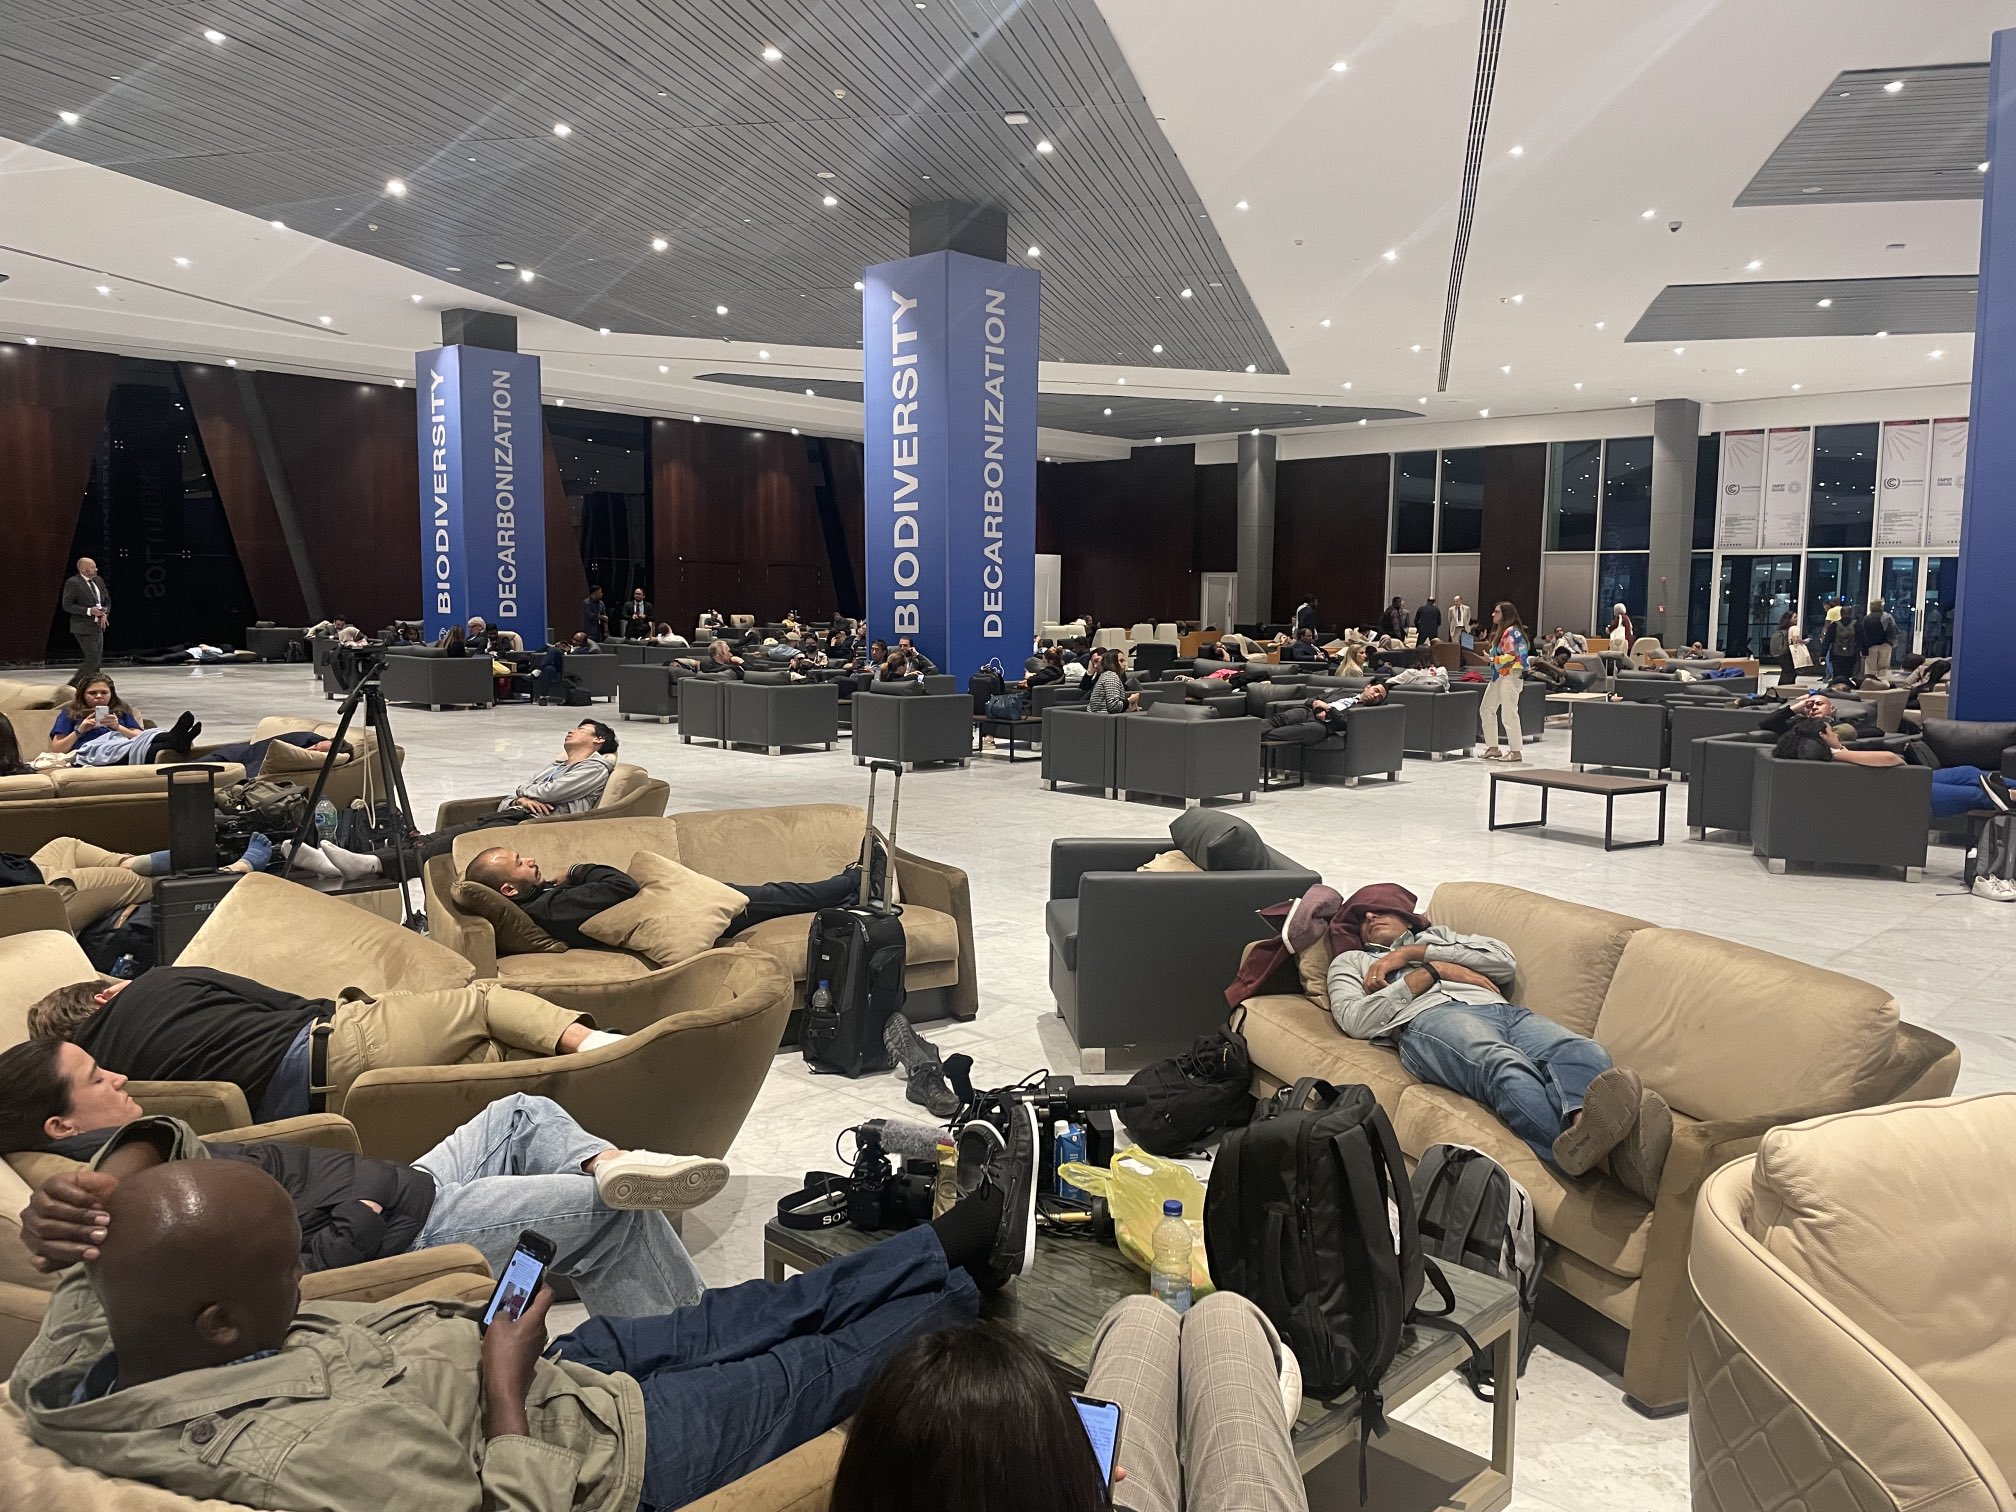 People sleep on couches at 2:26 am in Sharm el-Sheikh, Egypt at the COP27 U.N. Climate Summit on 19 November 2022, while waiting for the cover decision text and plenary. Photo: Simon Lewis / Twitter